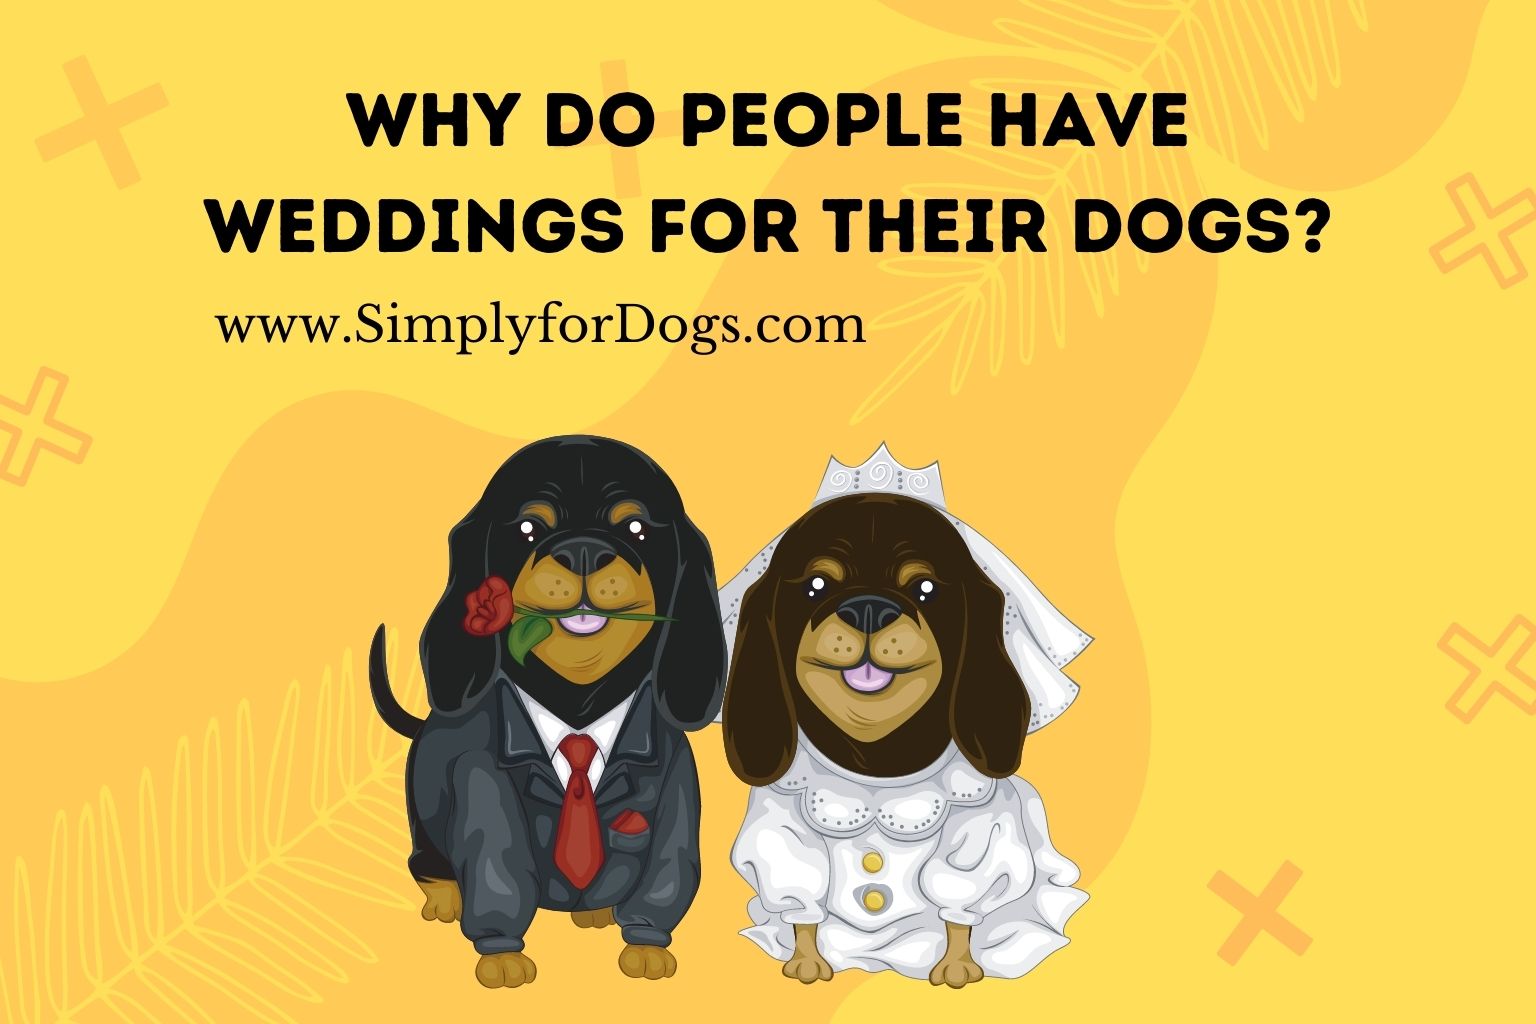 Why Do People Have Weddings for Their Dogs